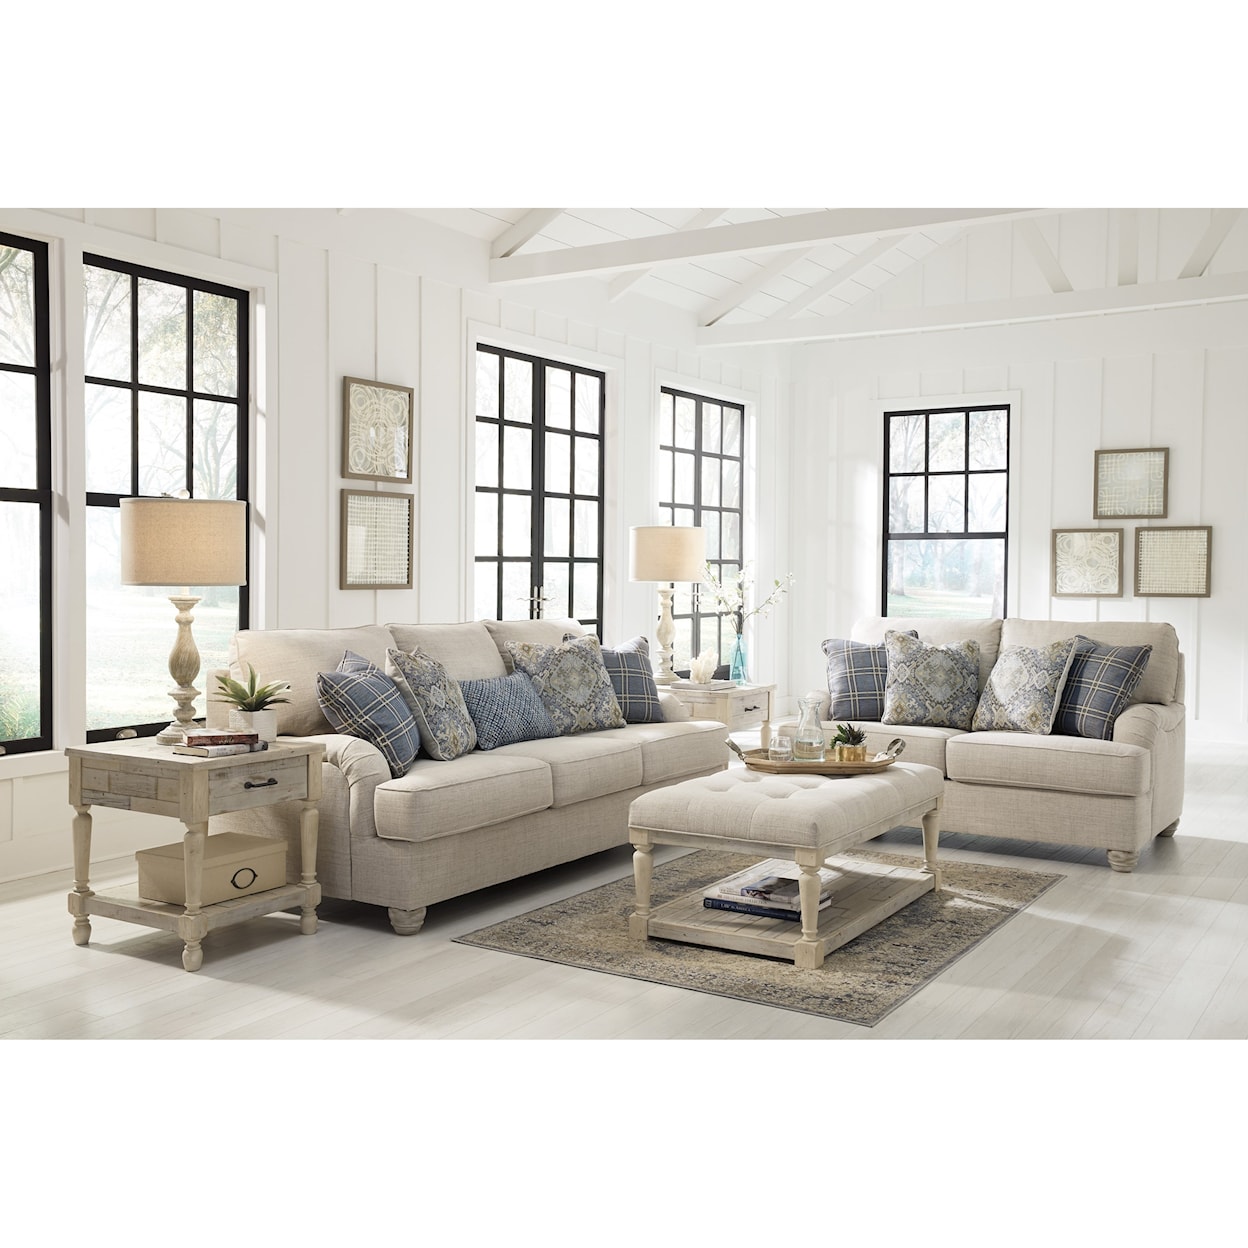 Benchcraft Traemore 2-Piece Living Room Group